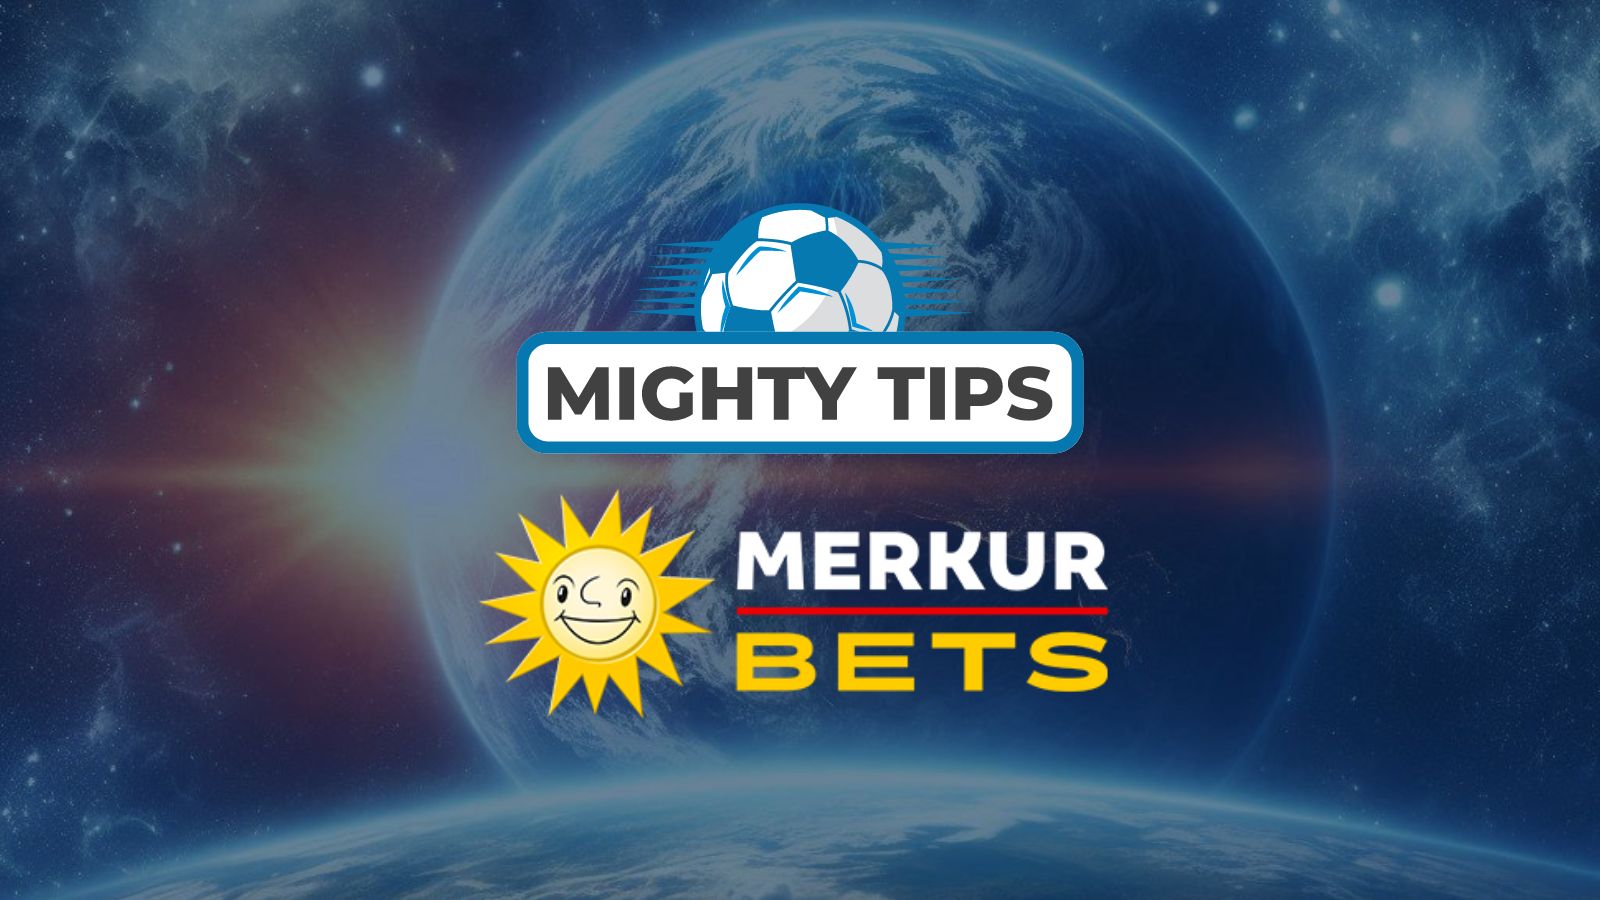 MightyTips announces collaboration agreement with Merkur Bets